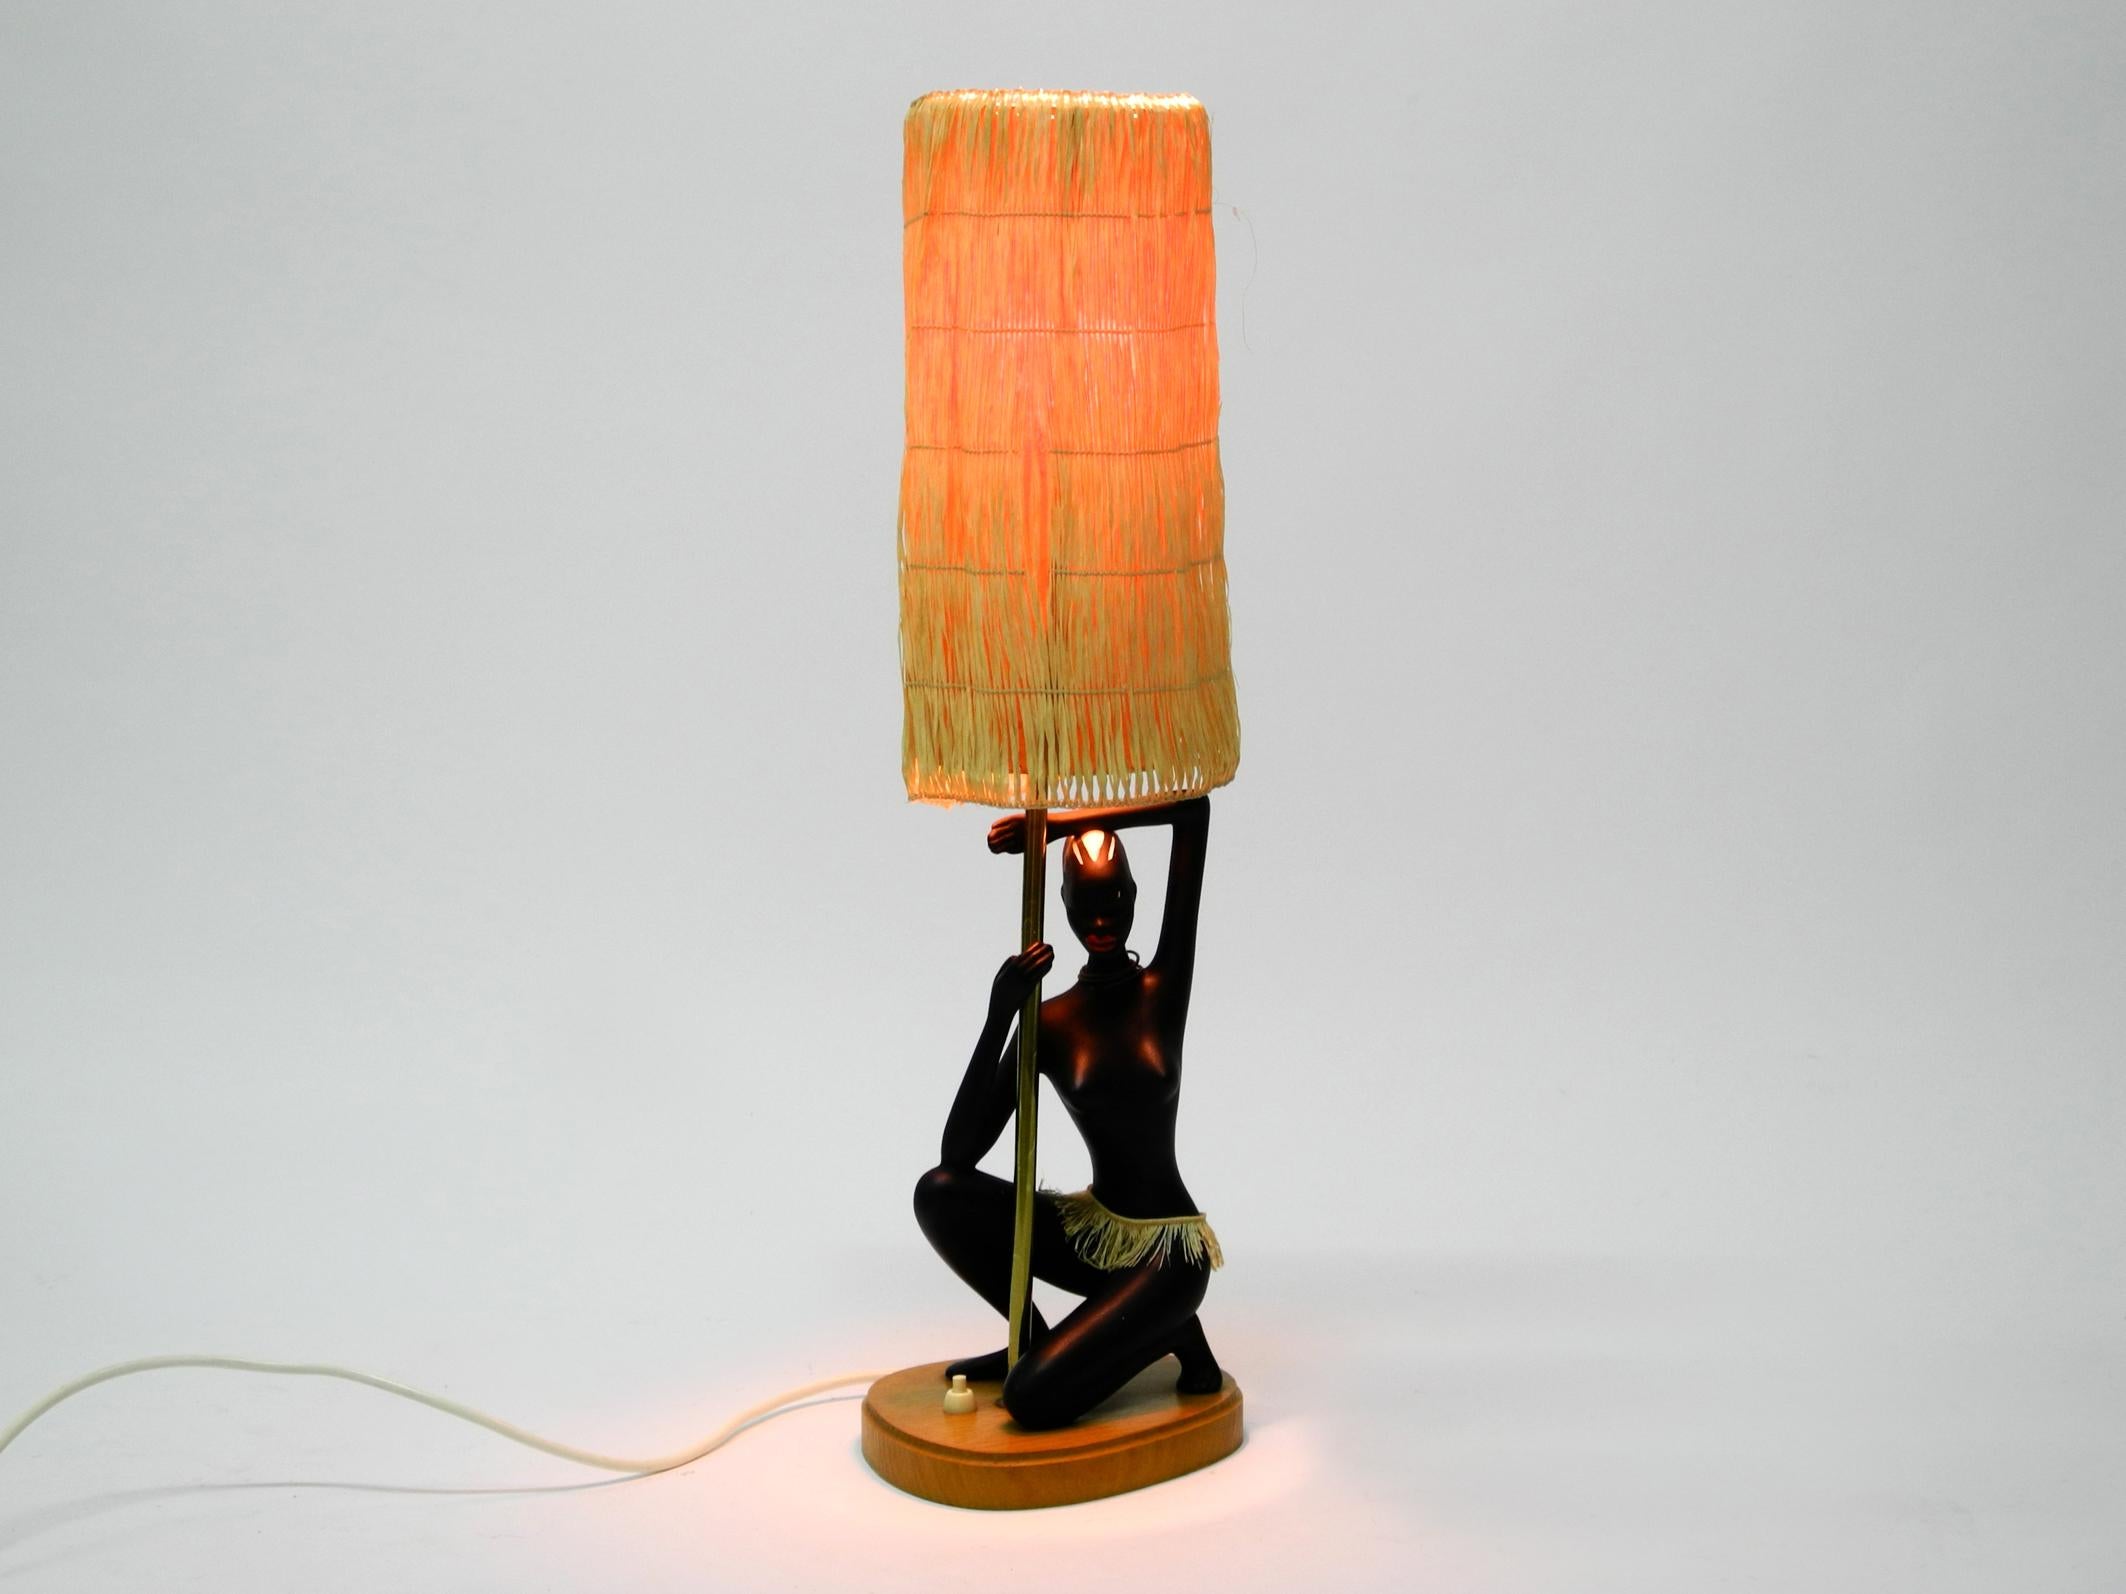 Beautiful very rare original midcentury Cortendorf ceramic table lamp.
Very fine African female body down on one knee on a wooden base.
Very high quality with many nice details. Original lampshade made of raffia. Made in West Germany.
Very good